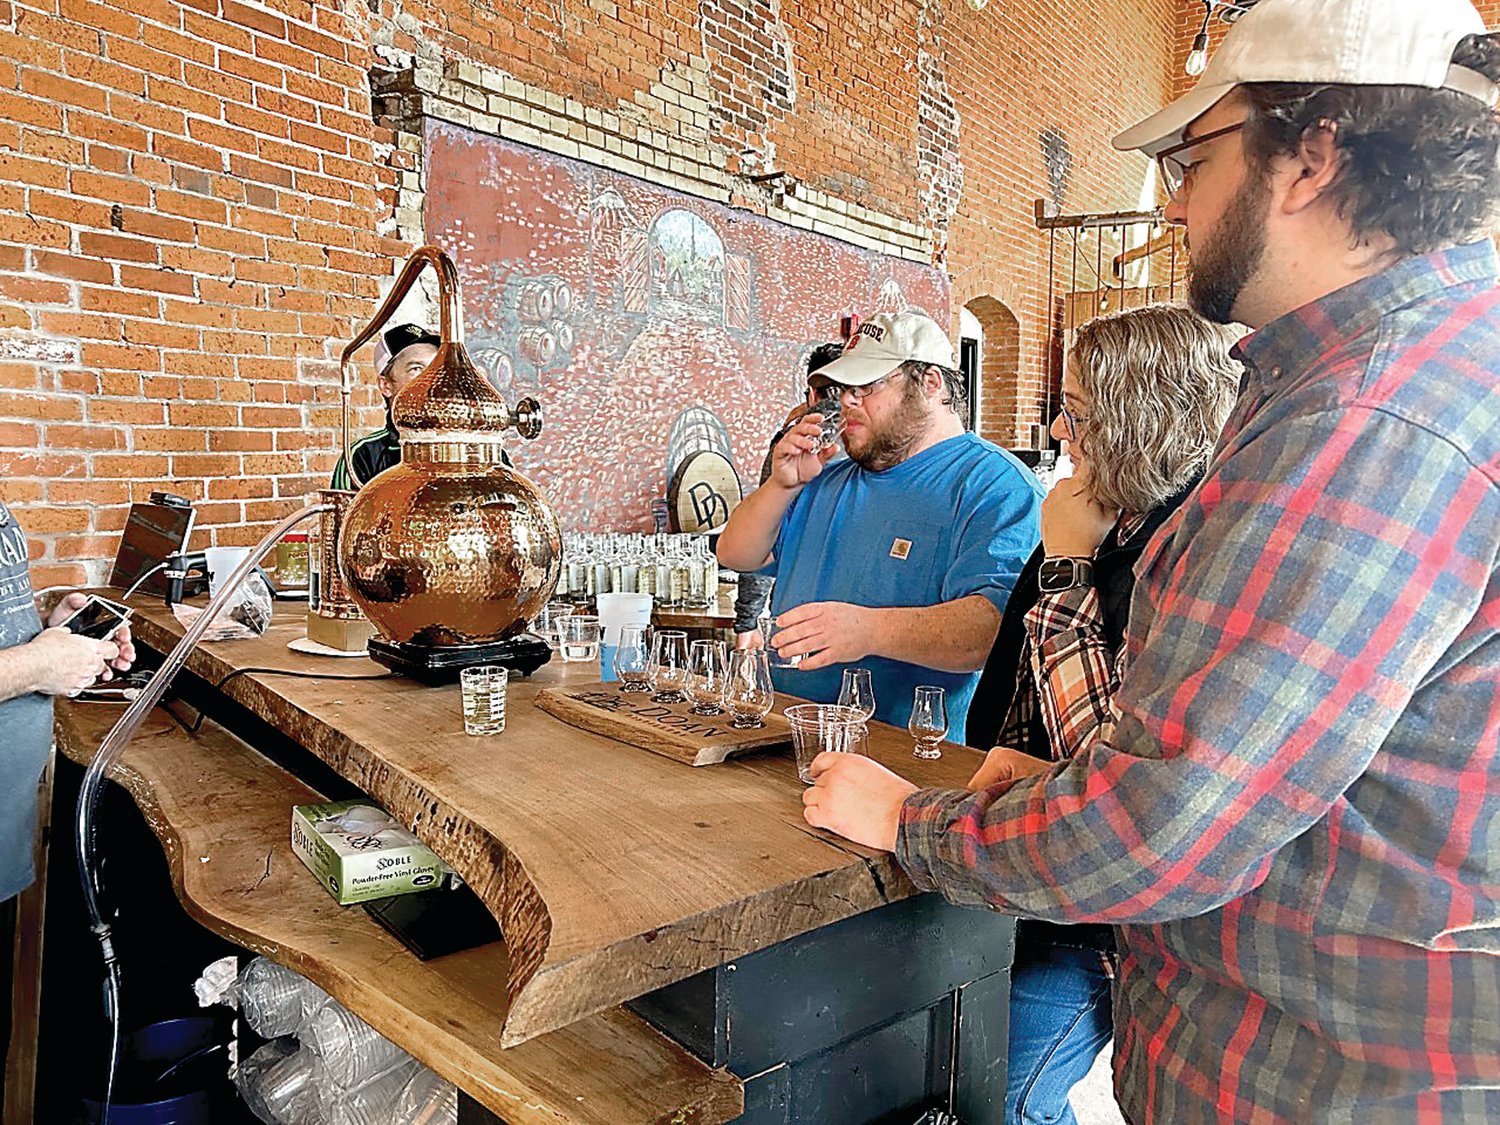 Northampton Community College students taste stills from the limbic system at Doan Distillery.